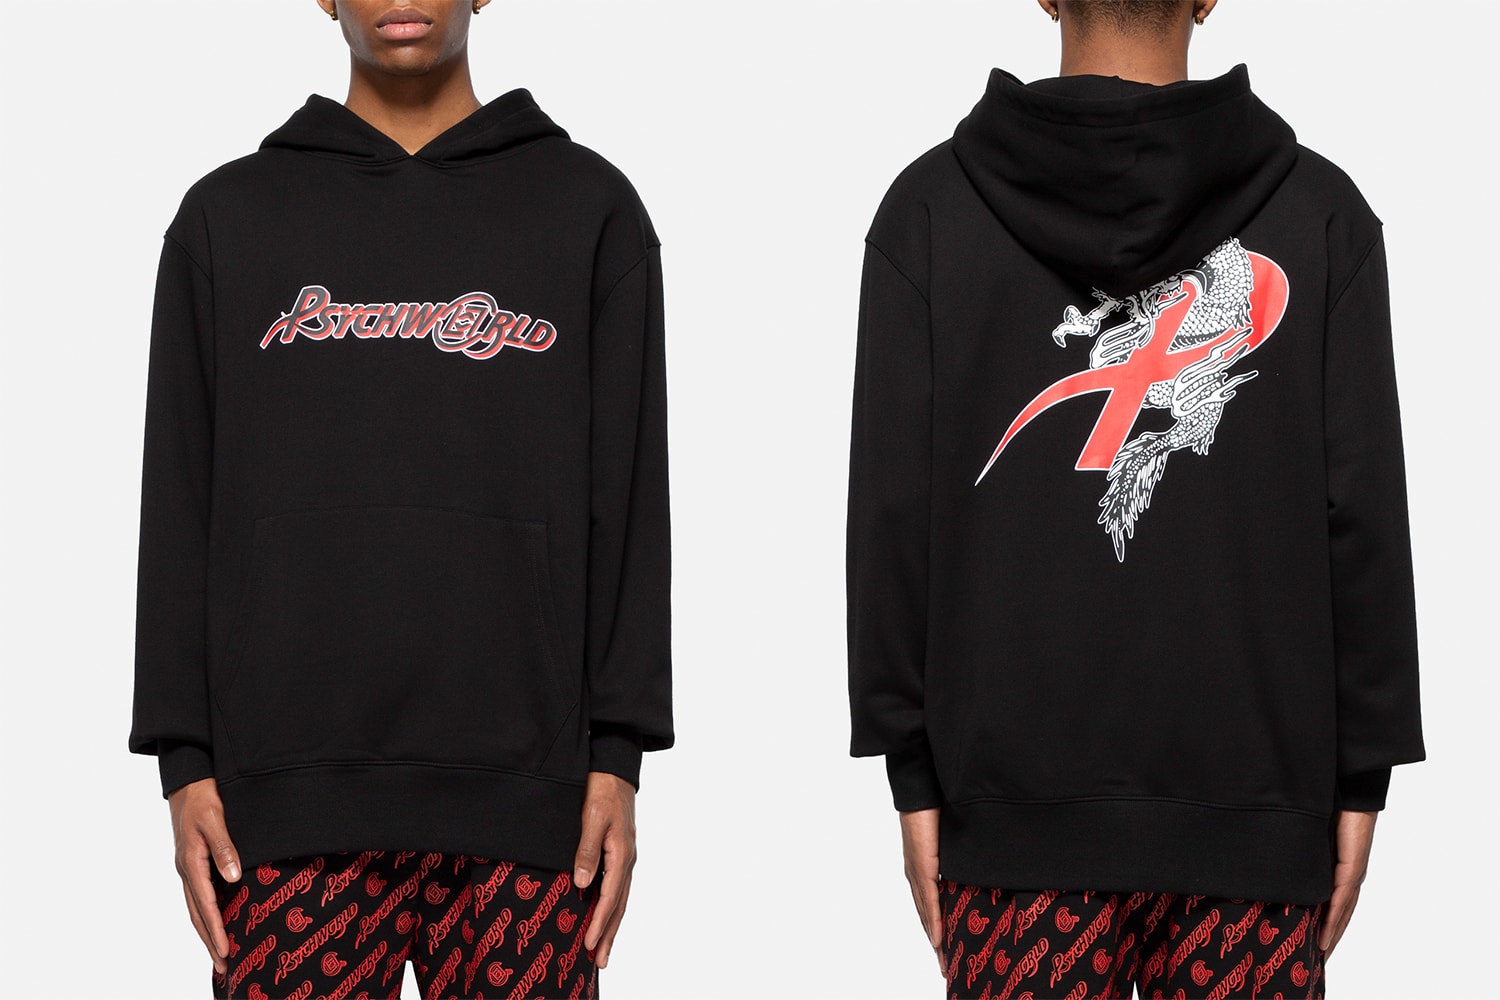 CLOT Psychworld Capsule Collection Release Info Zip Up Hoodie T-shirt Black White Red Blue Dragon 